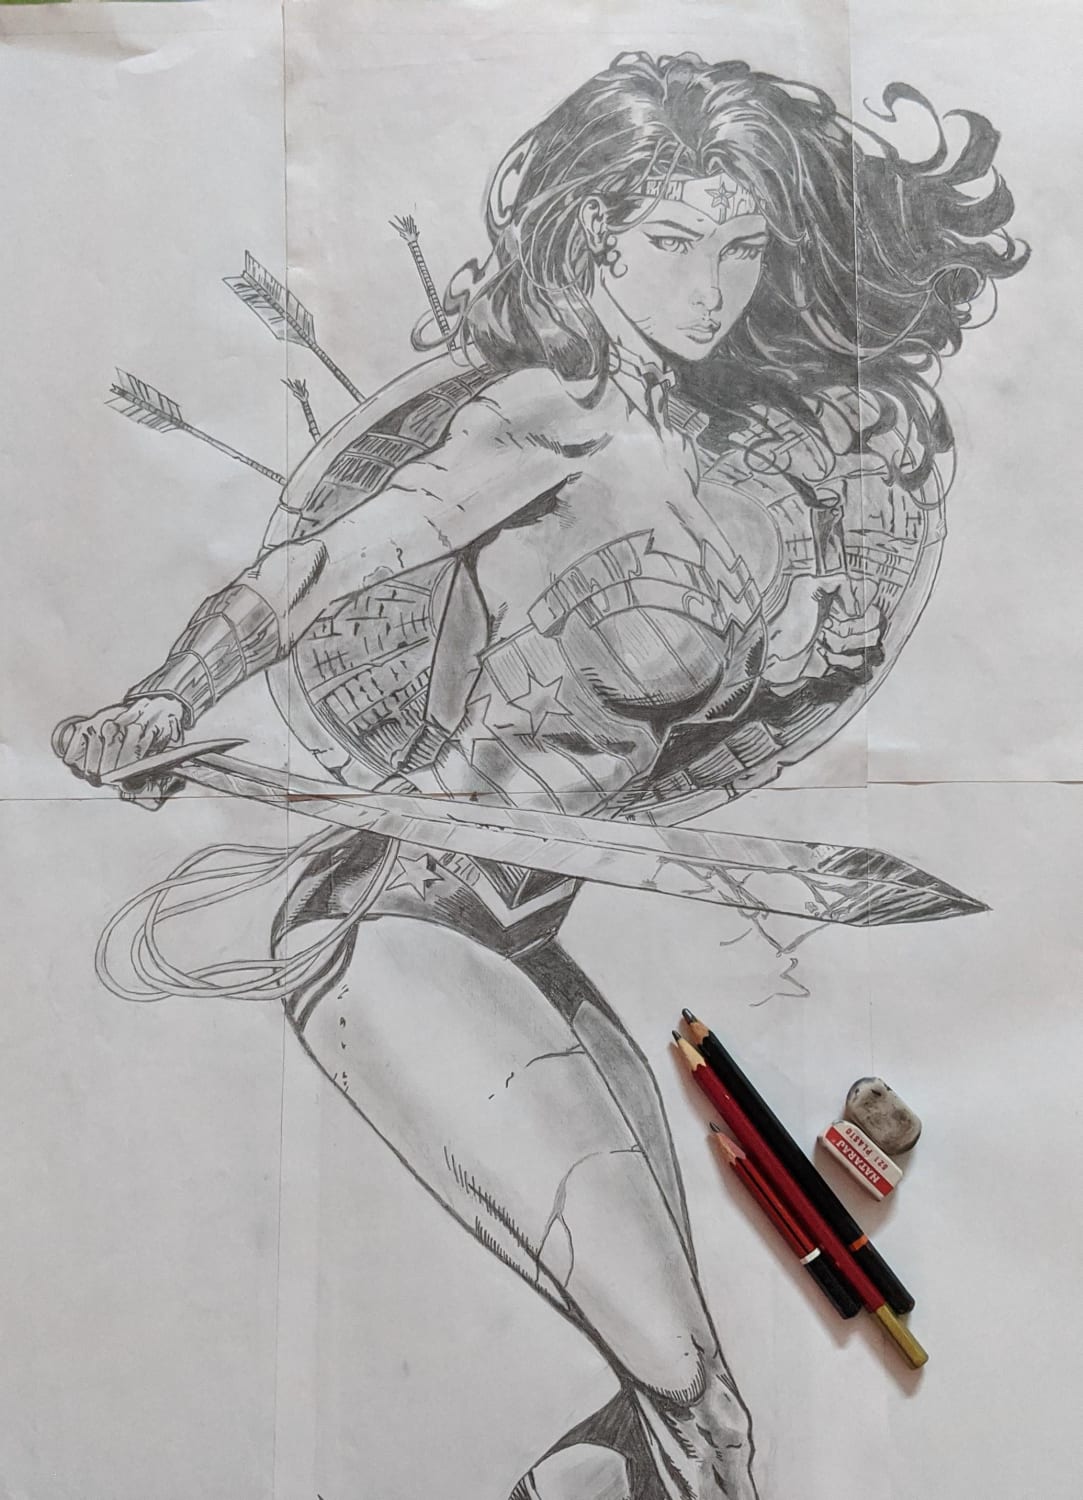 First time sharing my art here; a version of Wonder Woman.